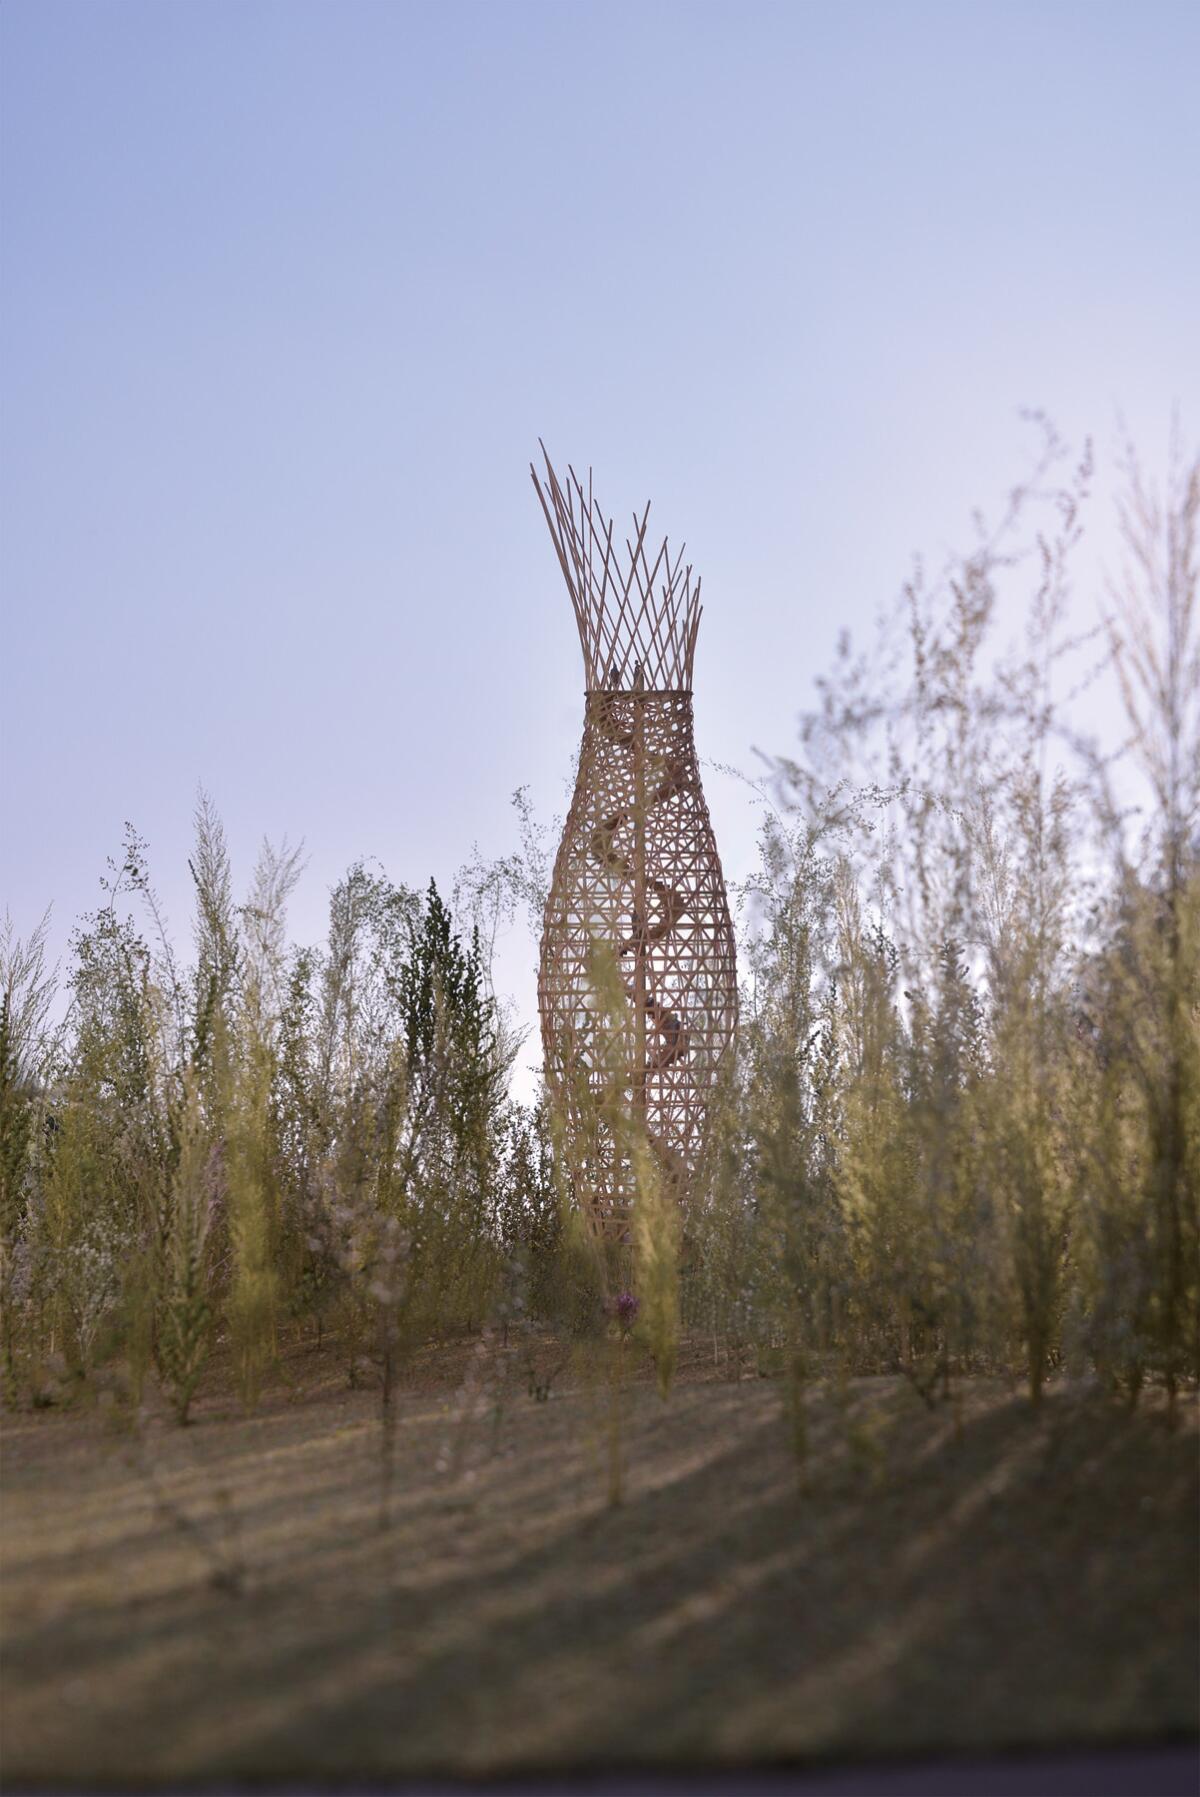 A more current rendering of Jae-Eun Choi's tower design for "Dreaming of Earth."